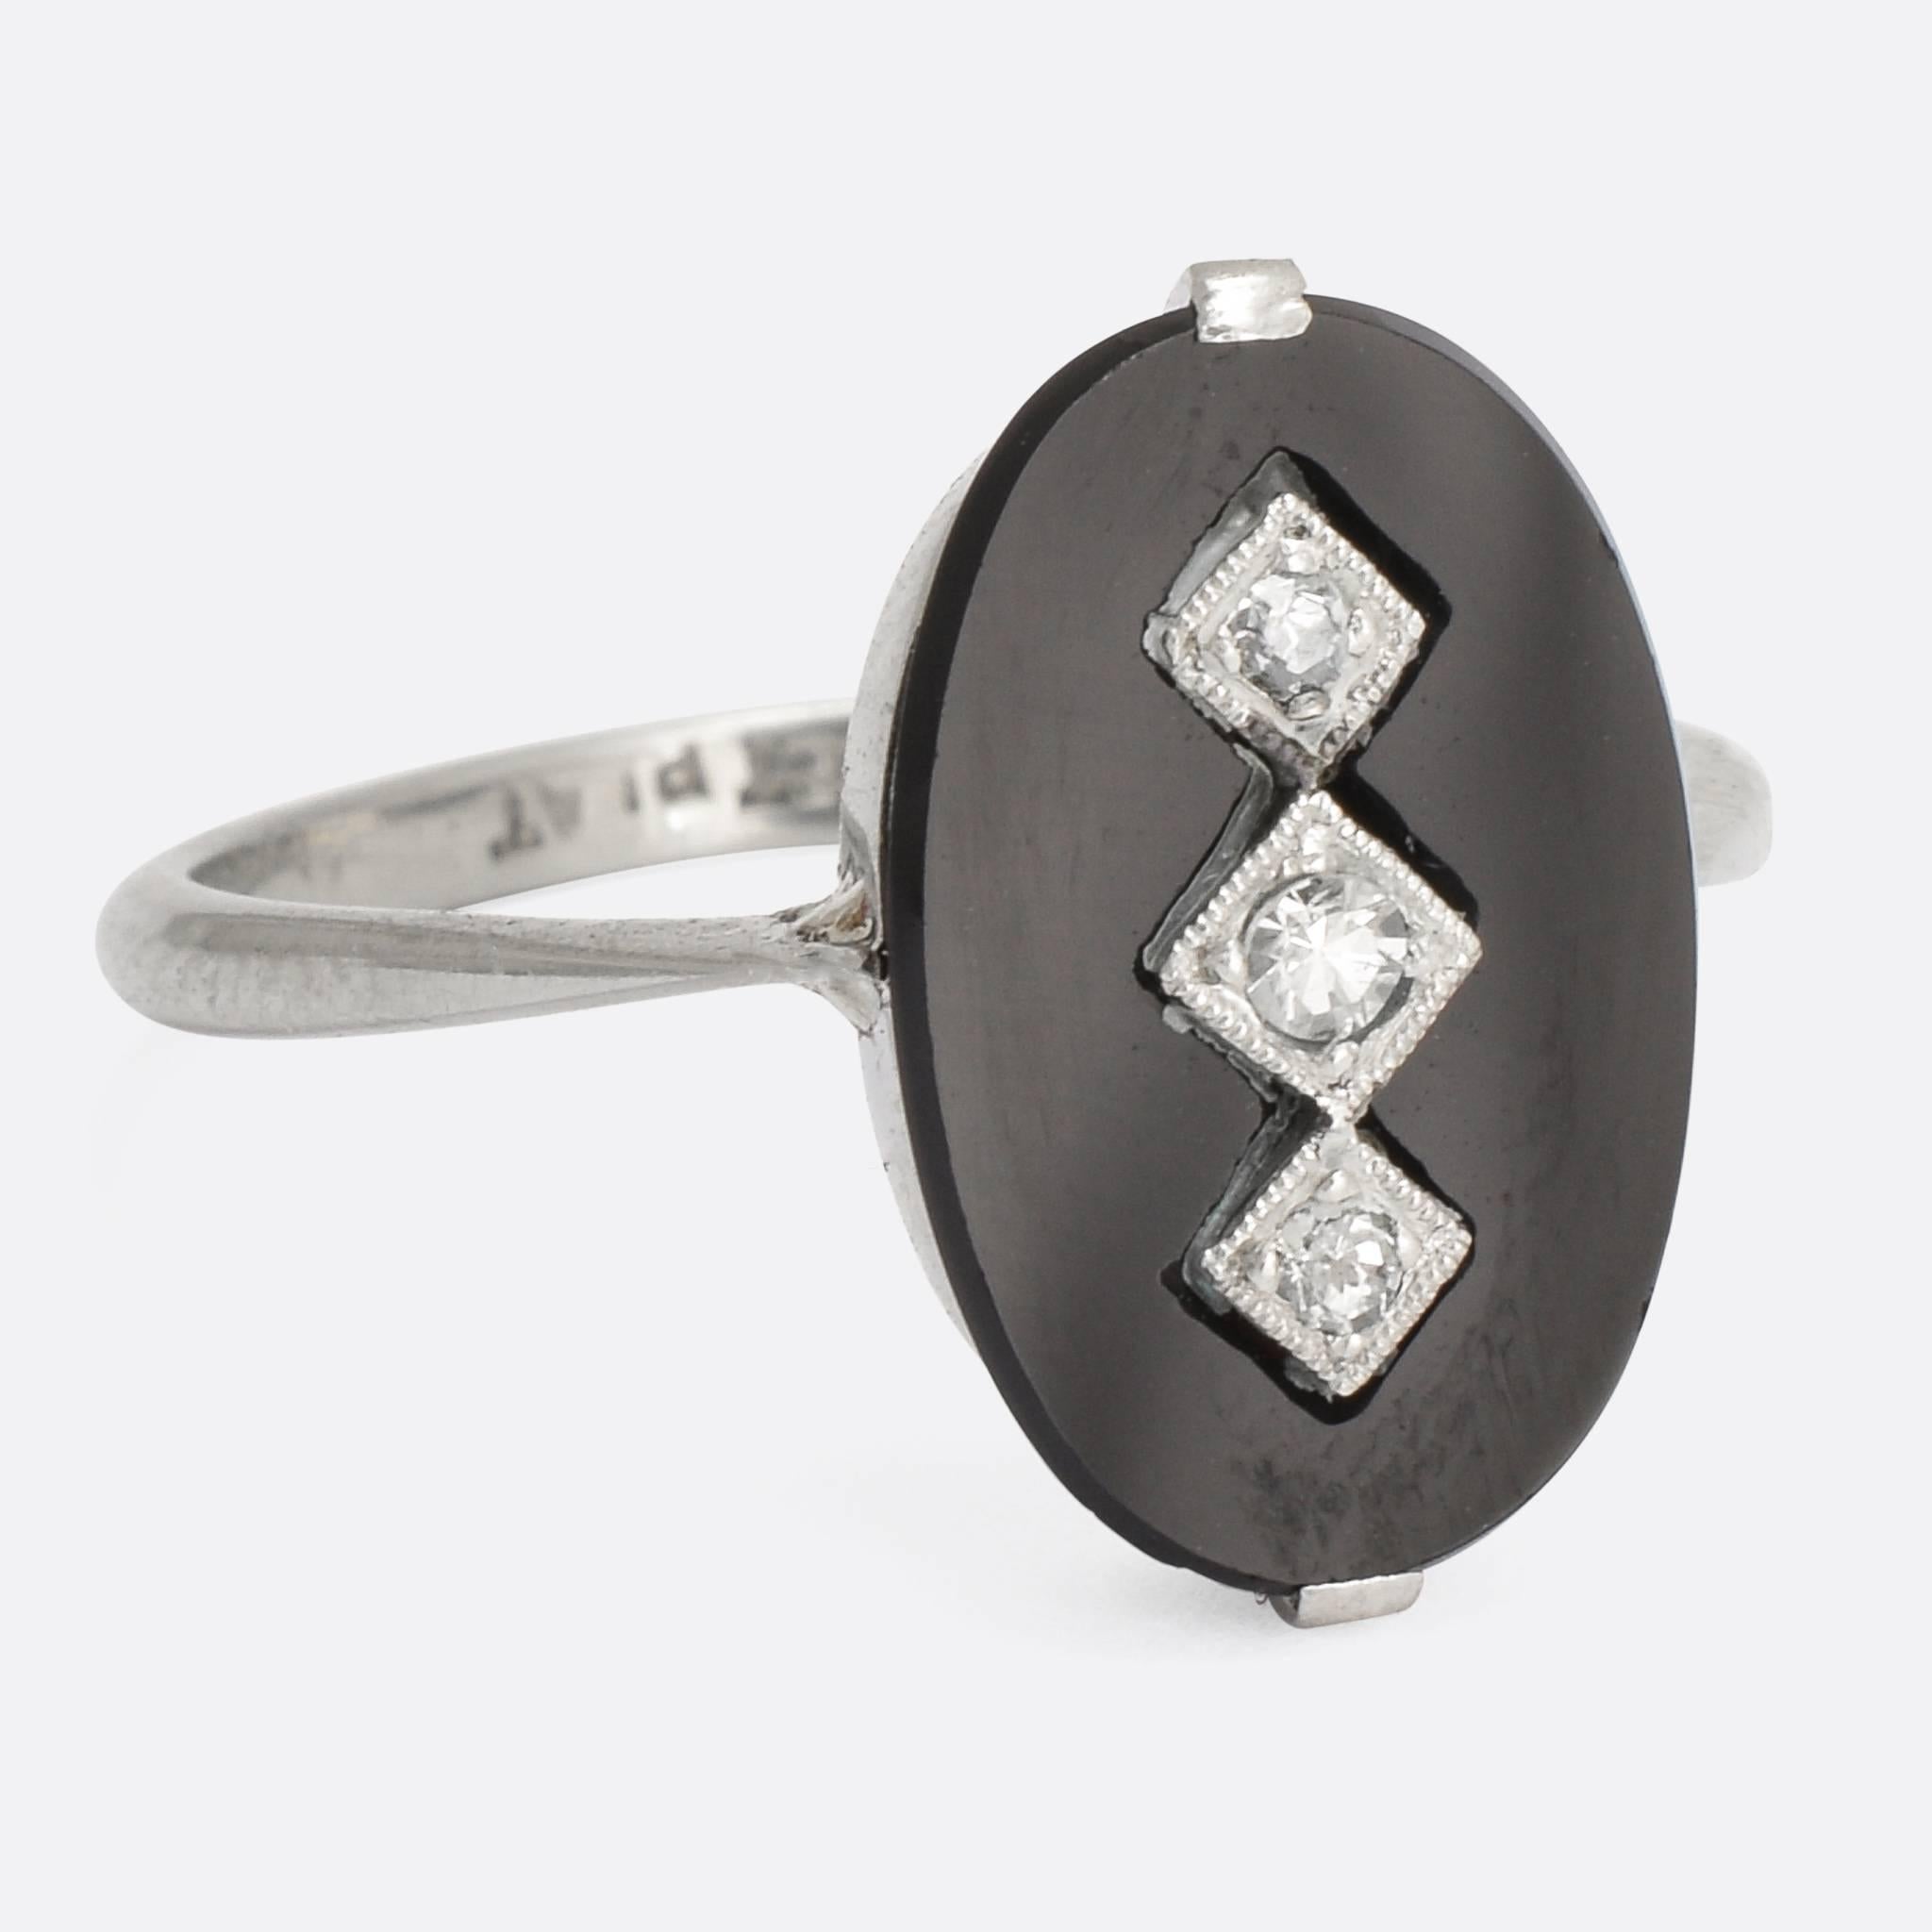 A cool Art Deco onyx and diamond panel ring, dating to c.1925. The three 8-cut diamonds glisten in millegrain settings, set into the oval black onyx panel; the whole head resting on elegant pinched shoulders. Modelled in platinum with an 18k white